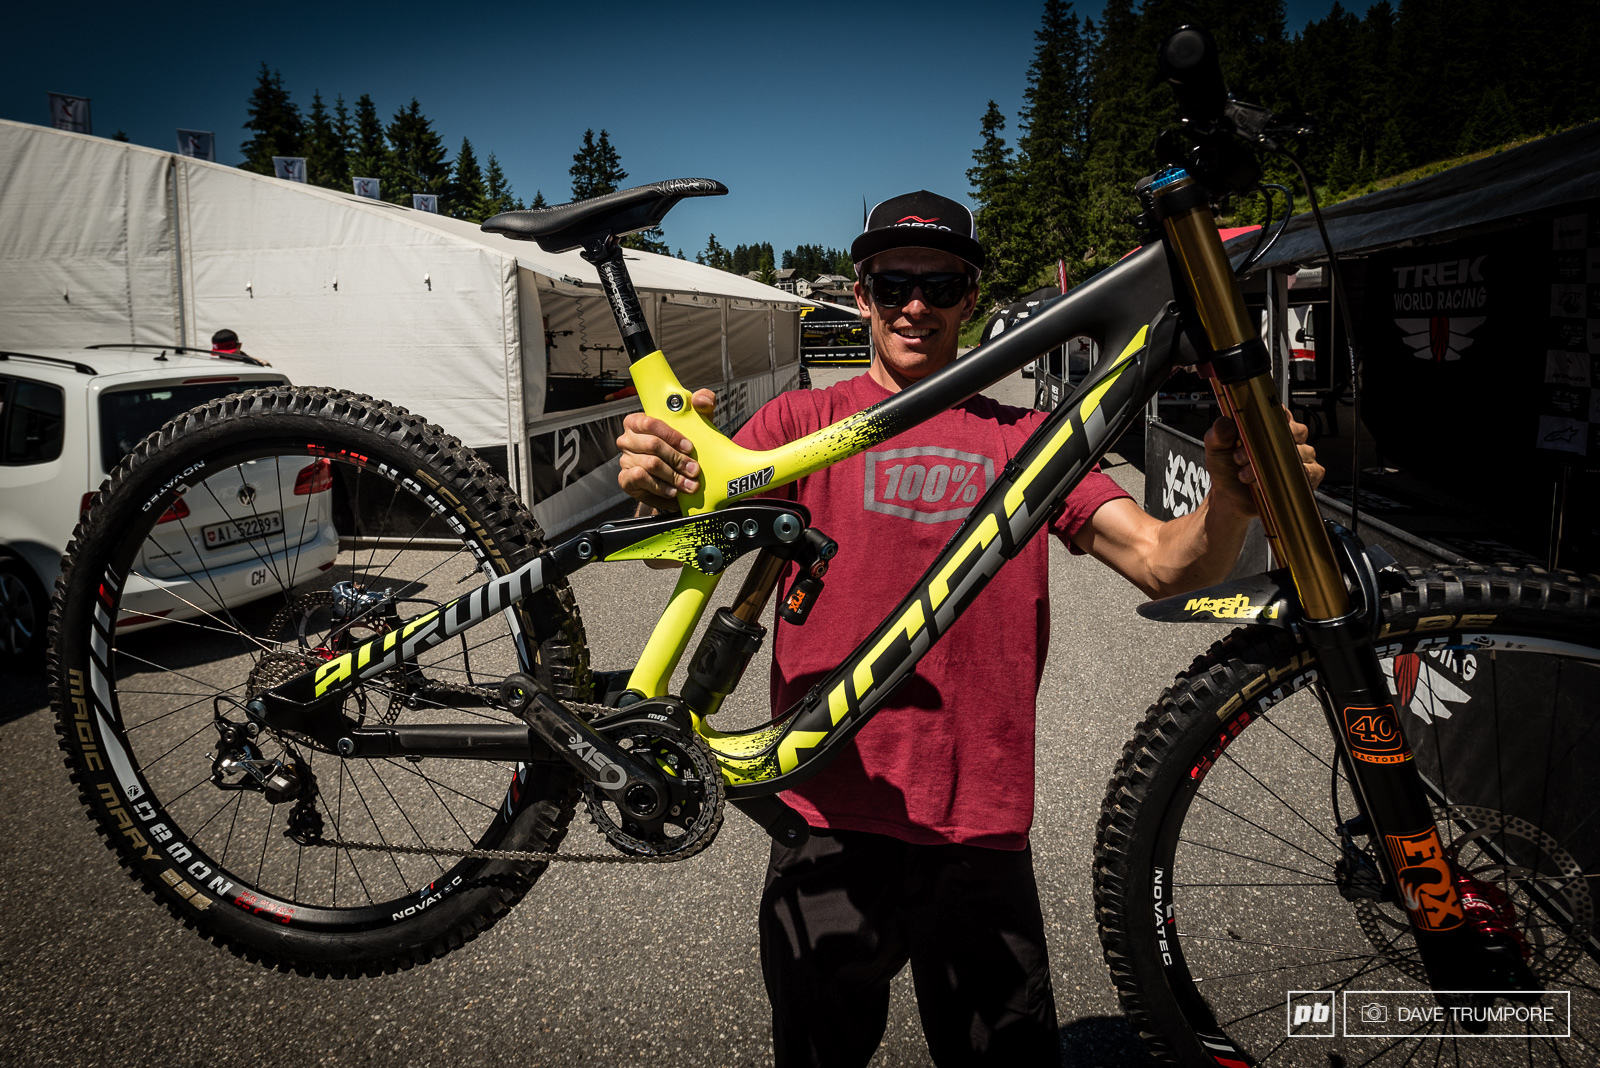 Sam Blenkinsop's "new" Norco.  You tell us what you think is so "new" about it